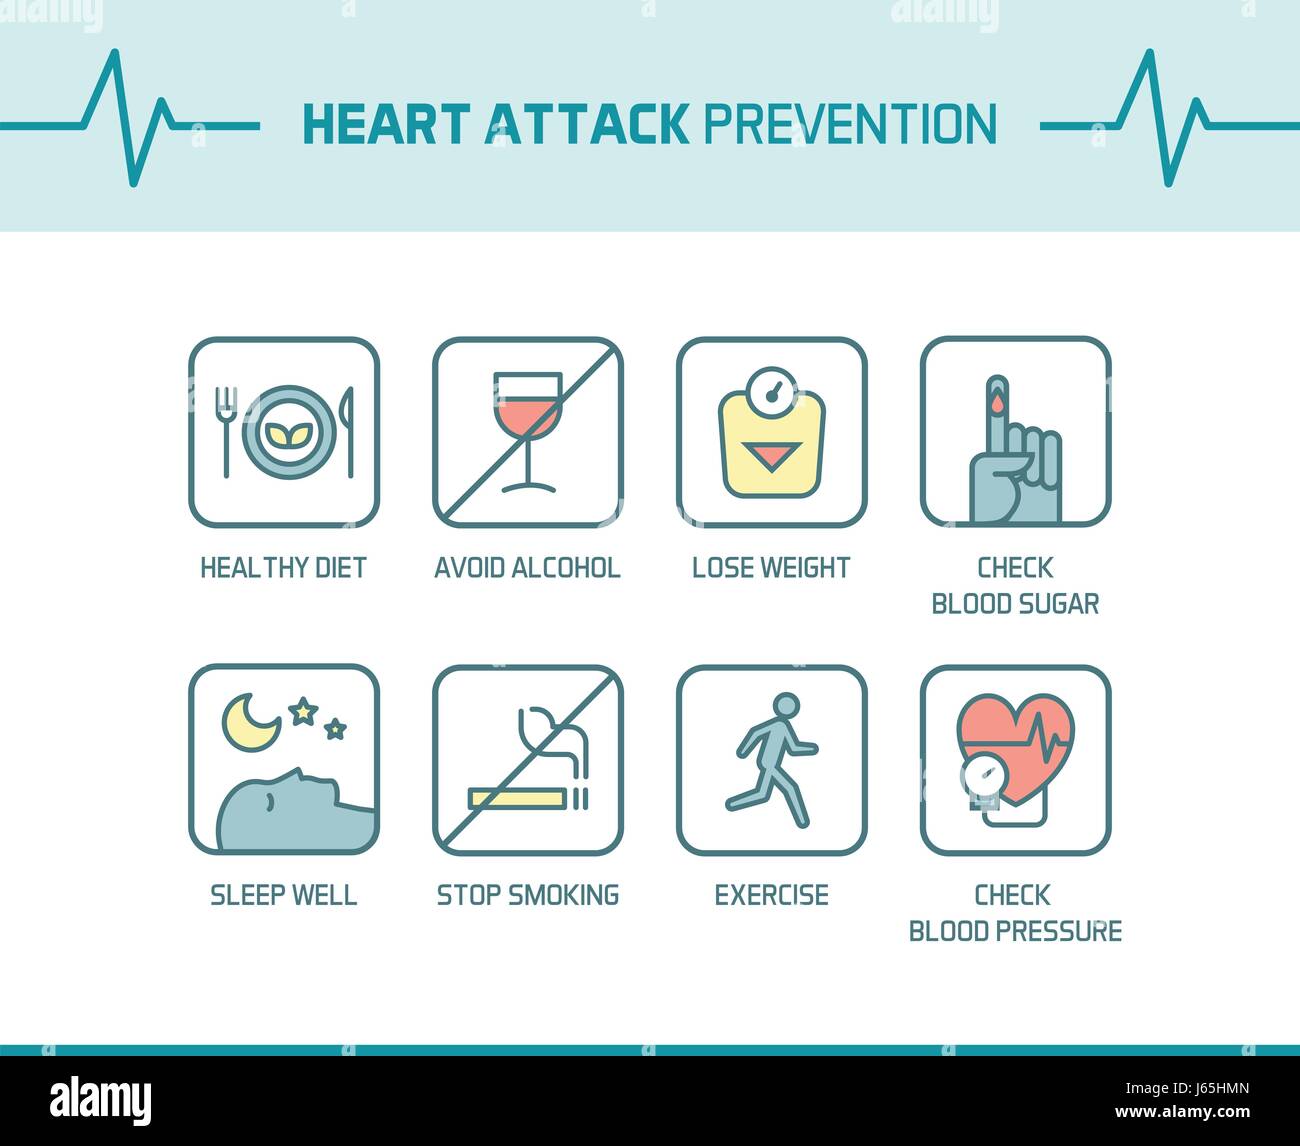 Heart attack and atherosclerosis prevention tips, healthy lifestyle good habits Stock Vector